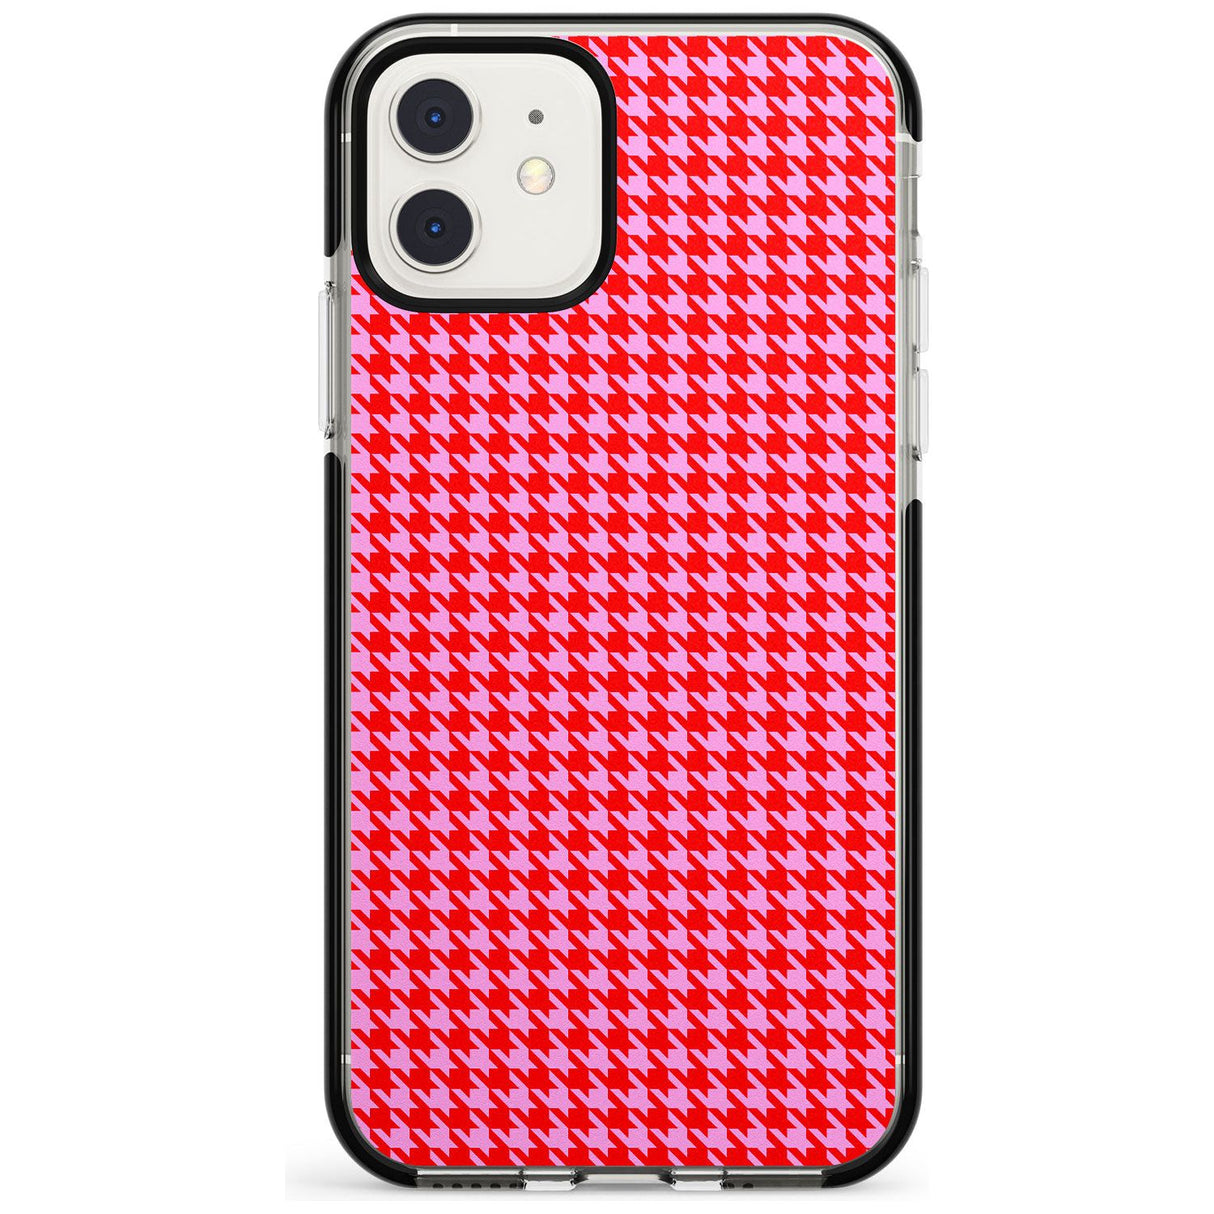 Neon Pink & Red Houndstooth Pattern Black Impact Phone Case for iPhone 11